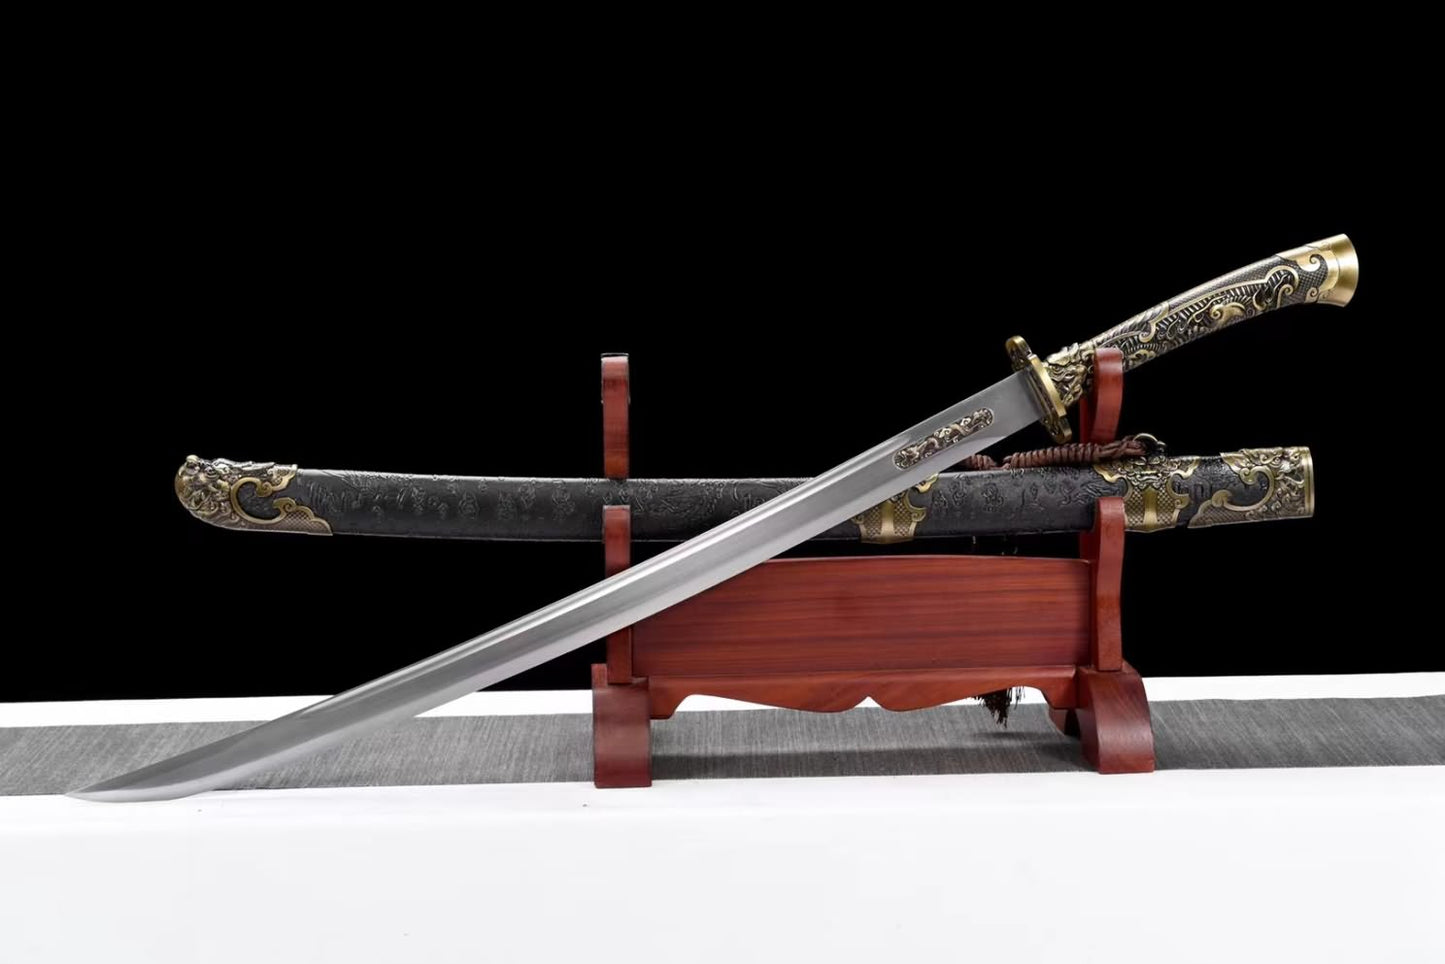 Qing dao Sword,Chinese Swords Real,Hand Forged High carobon Steel Blade,Alloy Handle